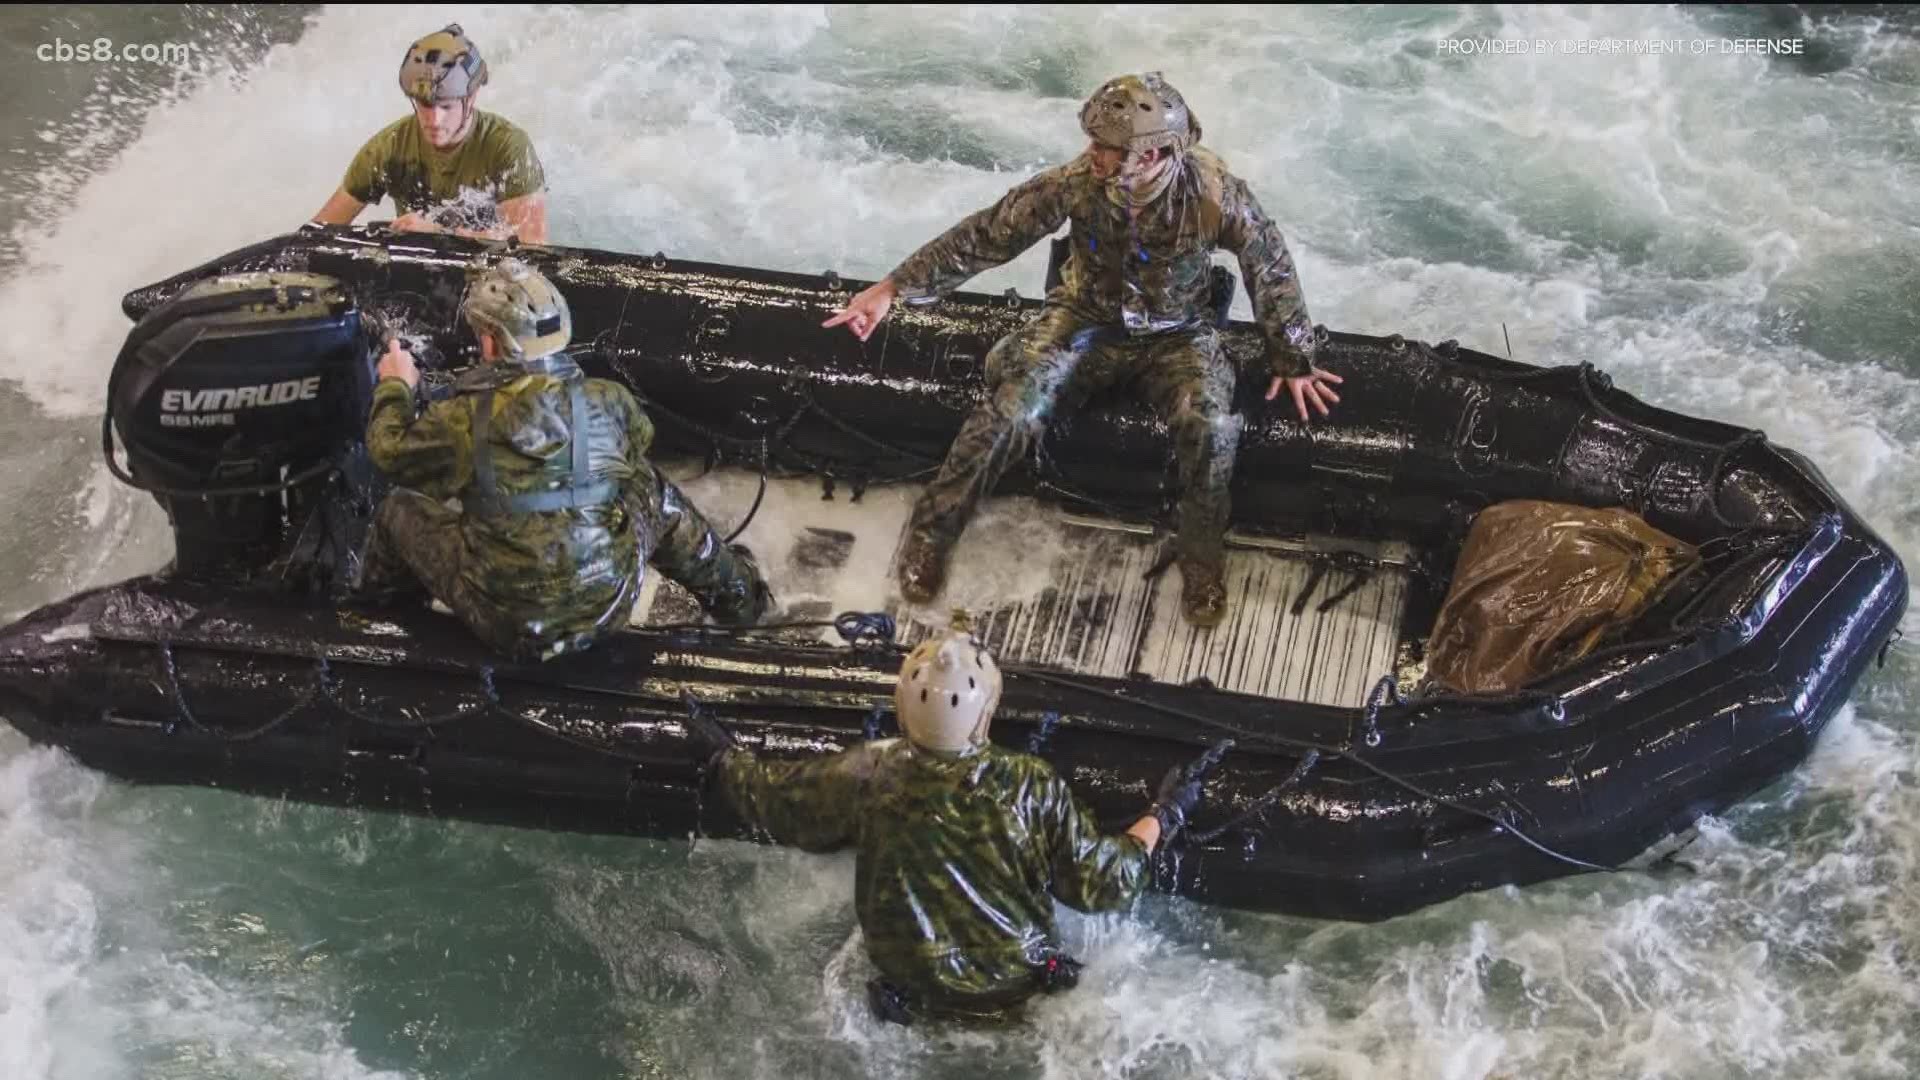 The 15th MEU and the ARG leadership determined that there was little probability of a successful rescue after an extensive 40-hour search.